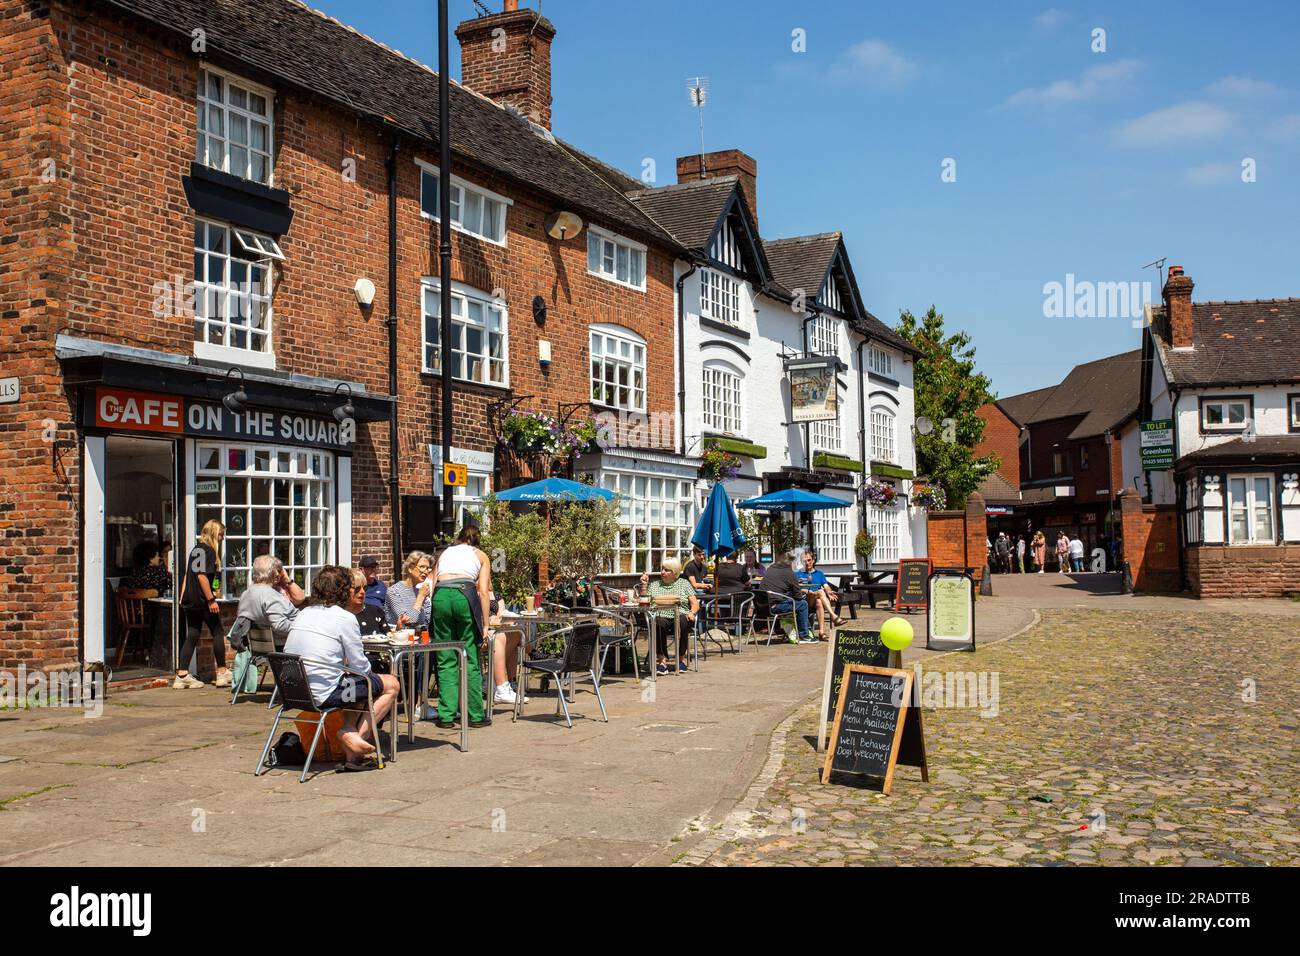 People sitting eating and drinking outside outdoors in the cobbled market square of the Cheshire market town of Sandbach Stock Photo